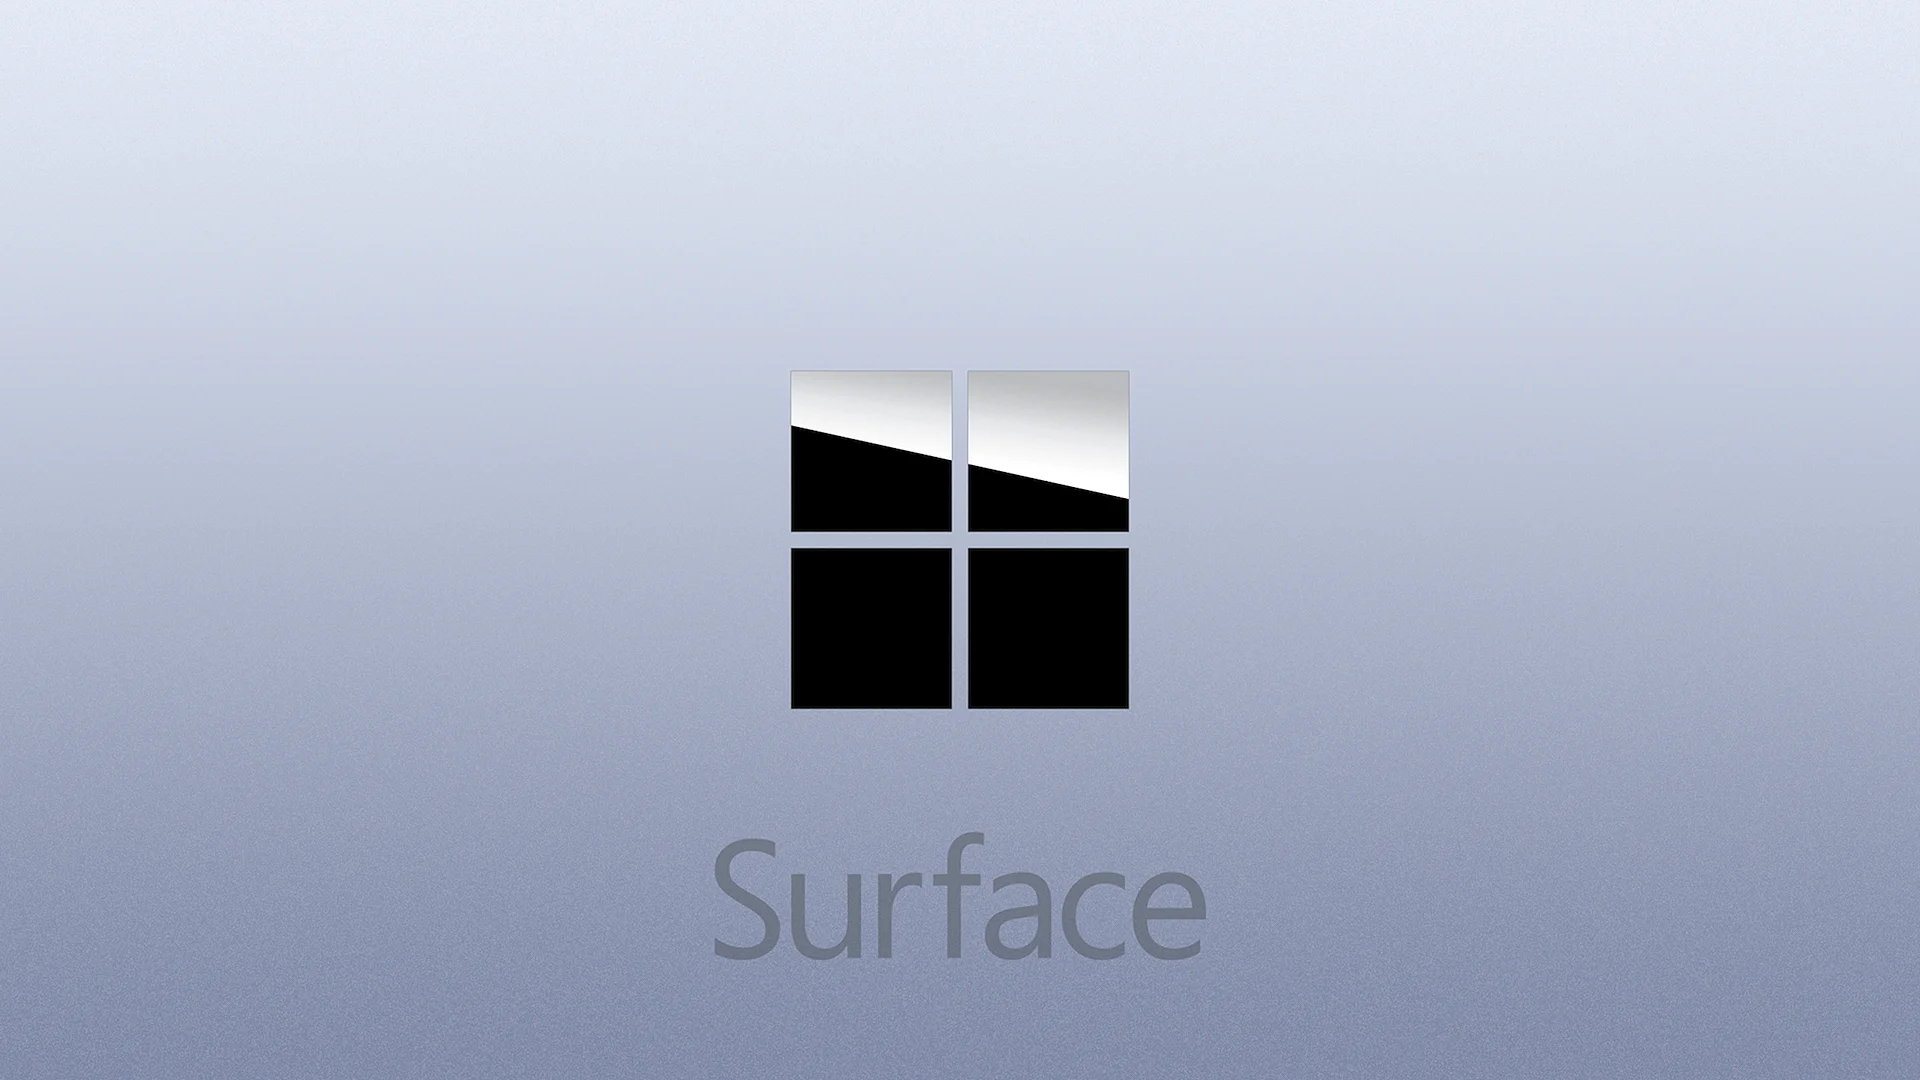 Microsoft Surface Wallpapers - Free Microsoft Surface Backgrounds ...